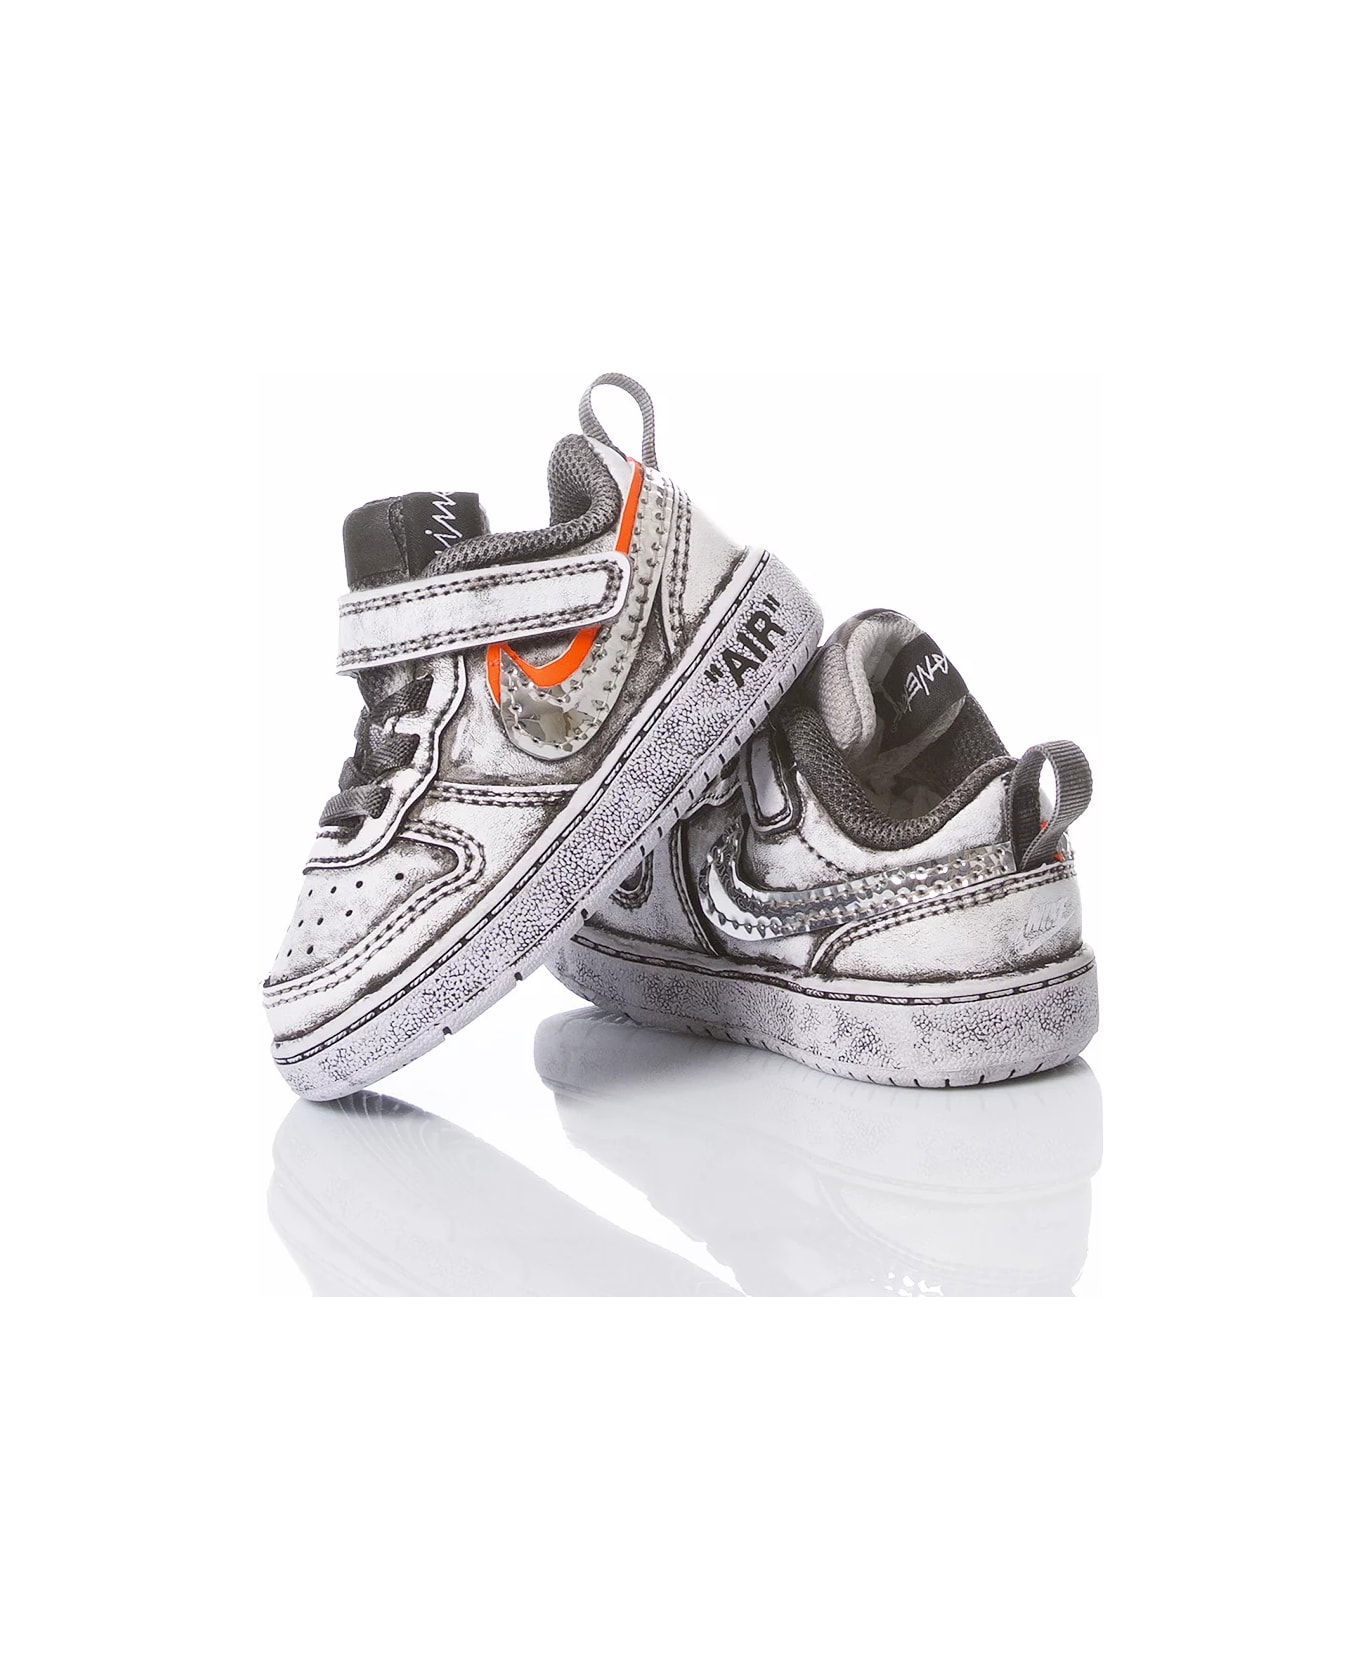 Mimanera Nike Baby: Customize Your Little Shoe!